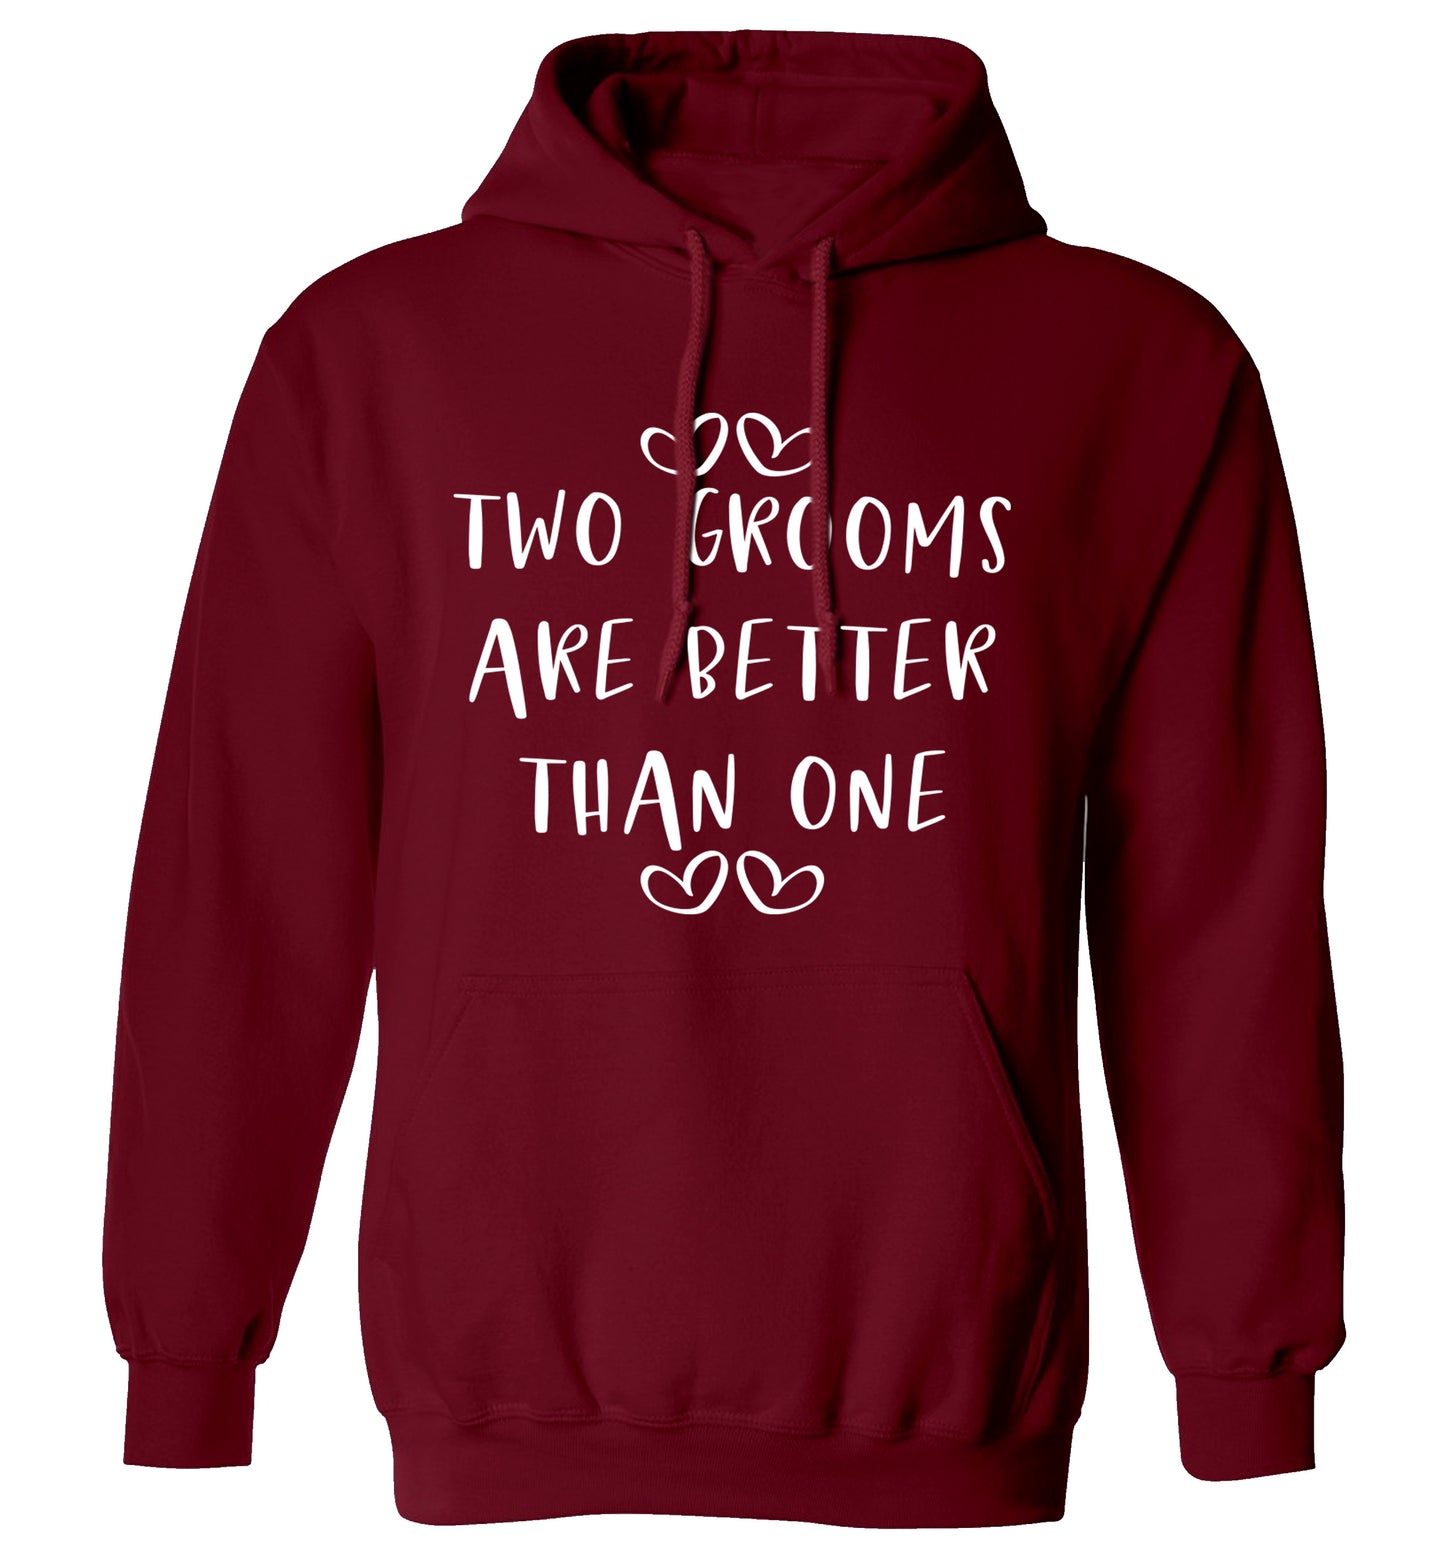 Two grooms are better than one adults unisex maroon hoodie 2XL